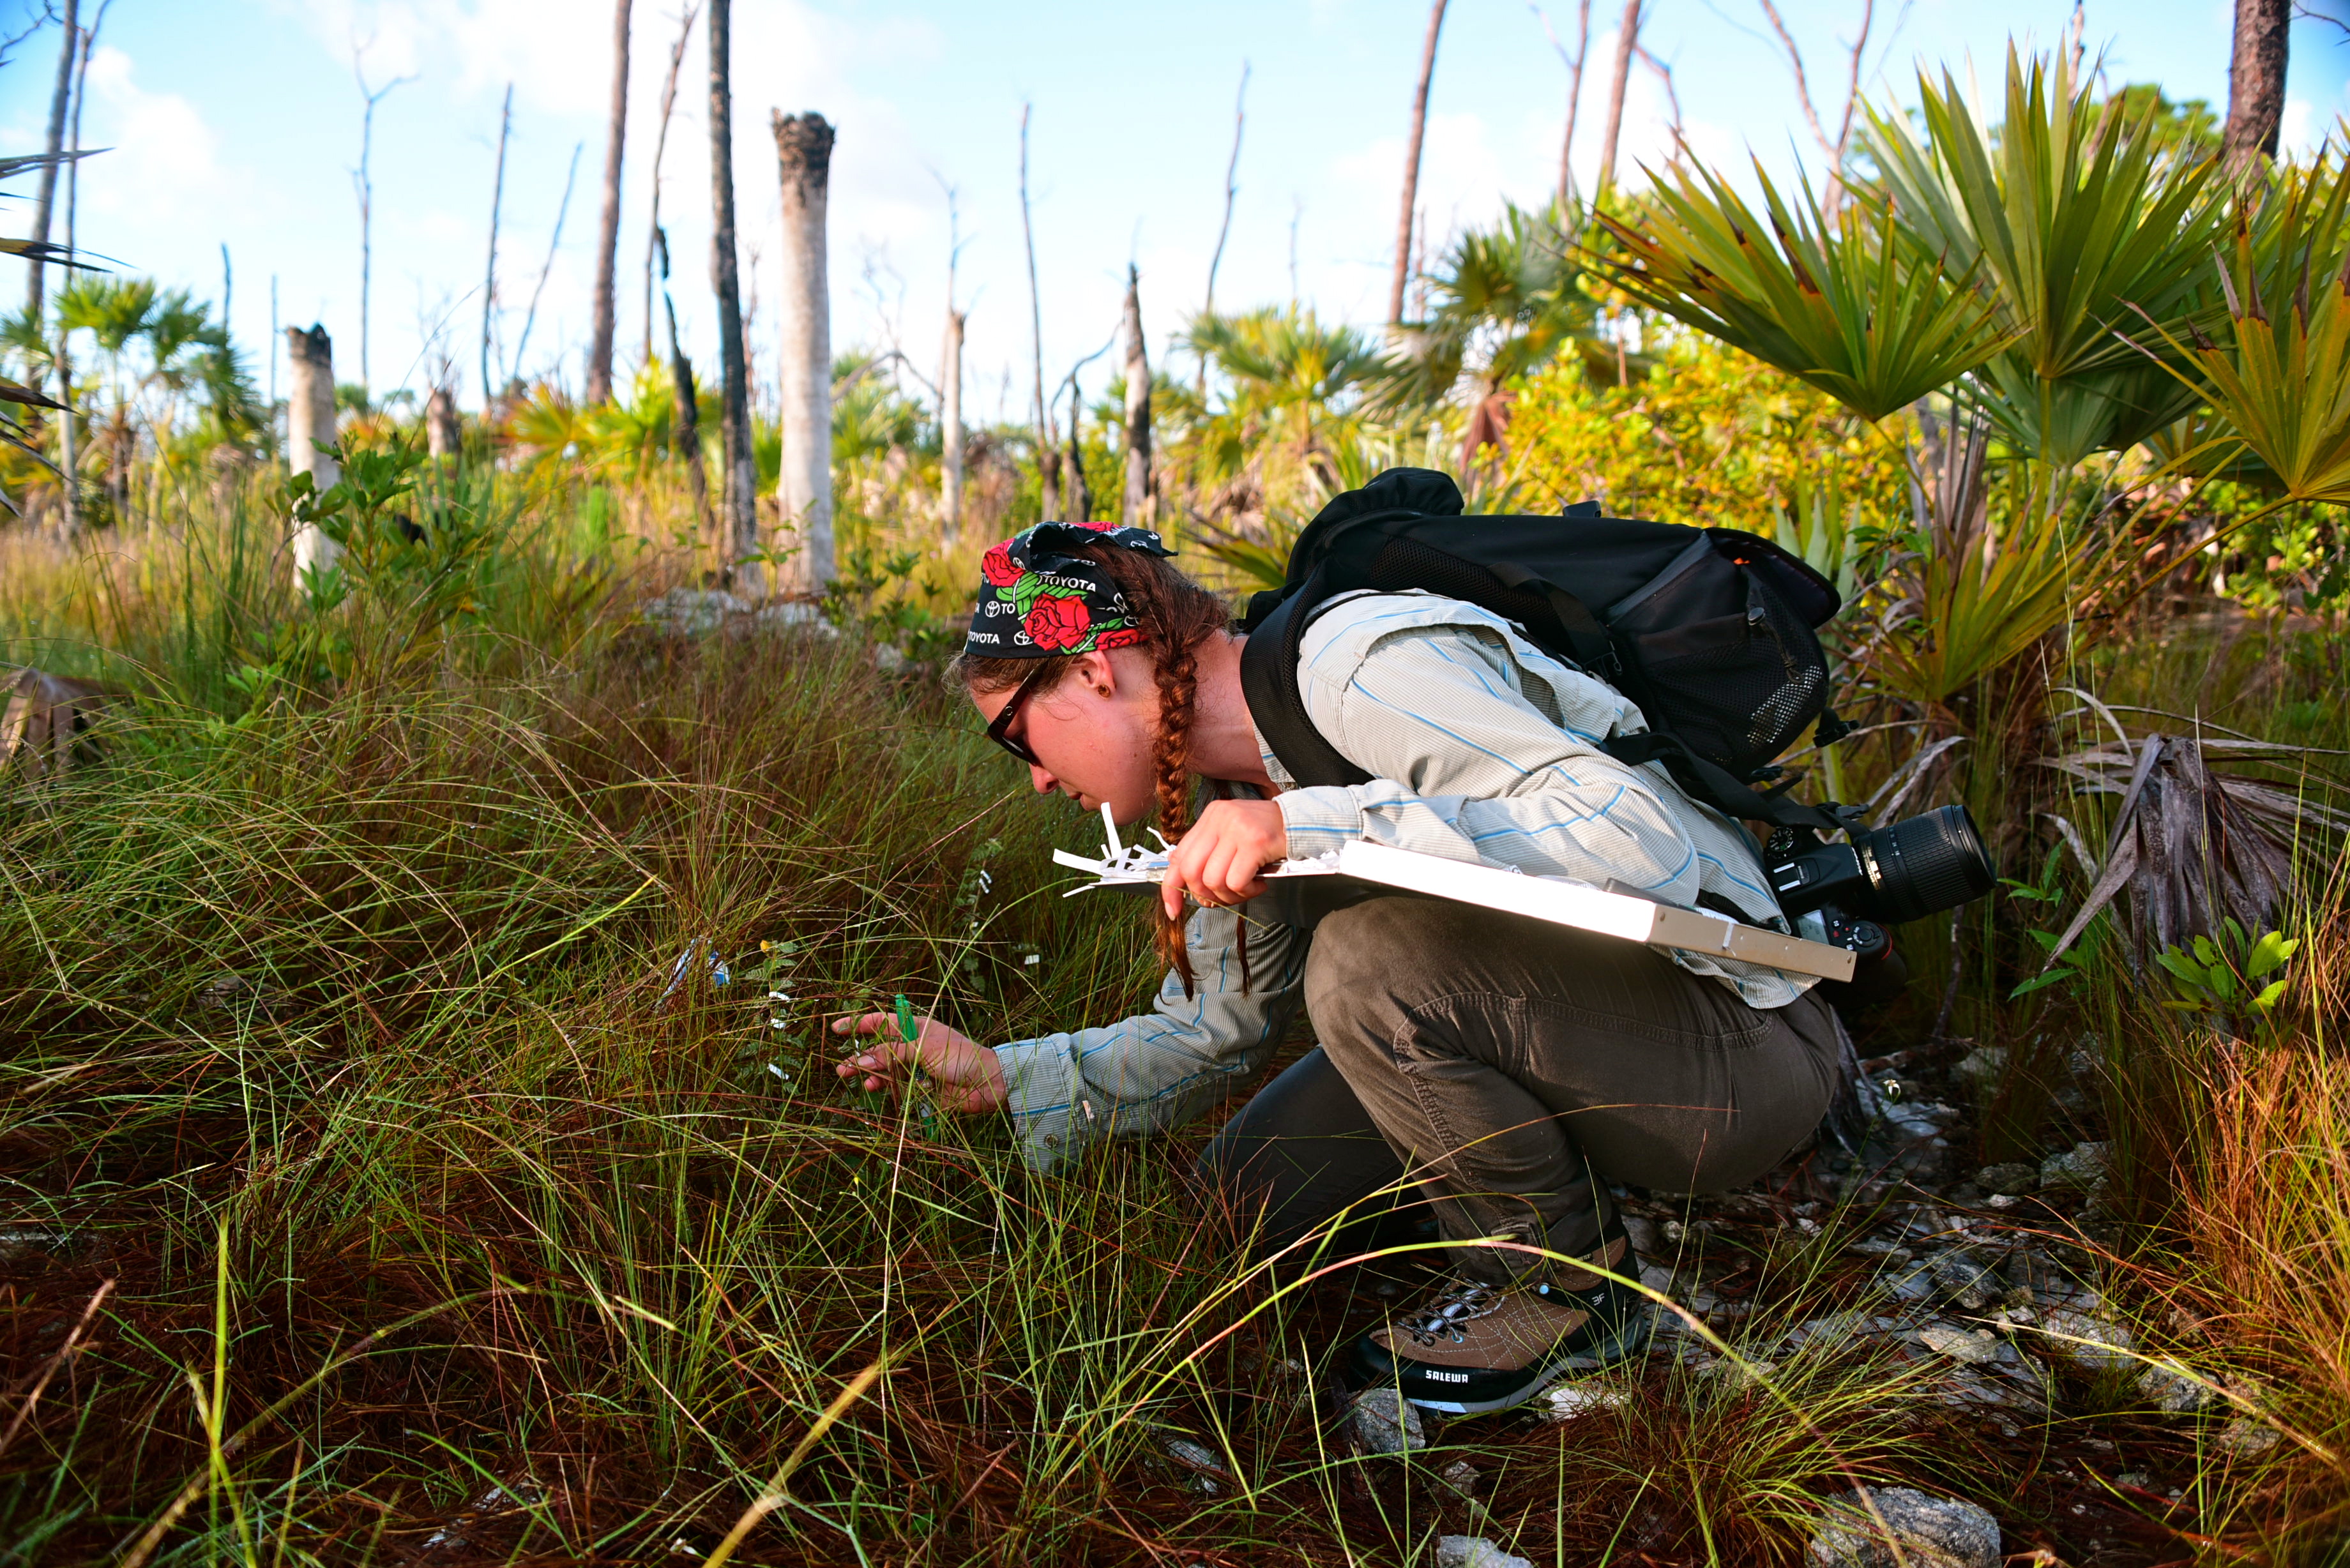 Brittany Harris records data on rare regional plants at a field site in the Florida Keys. Credit Brittany Harris.